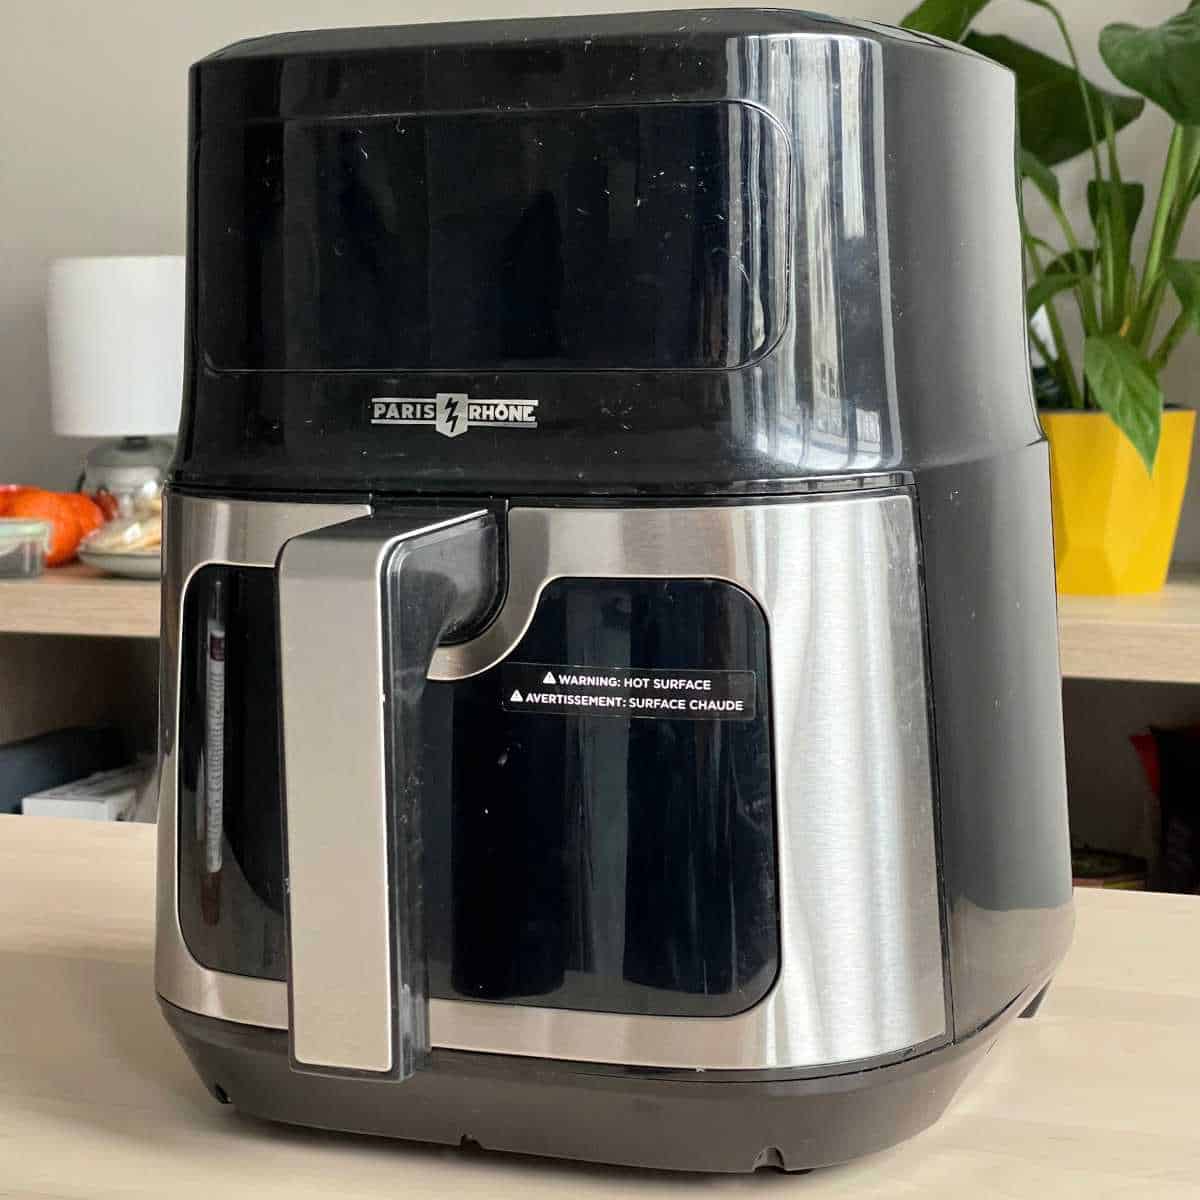 Example of an air fryer